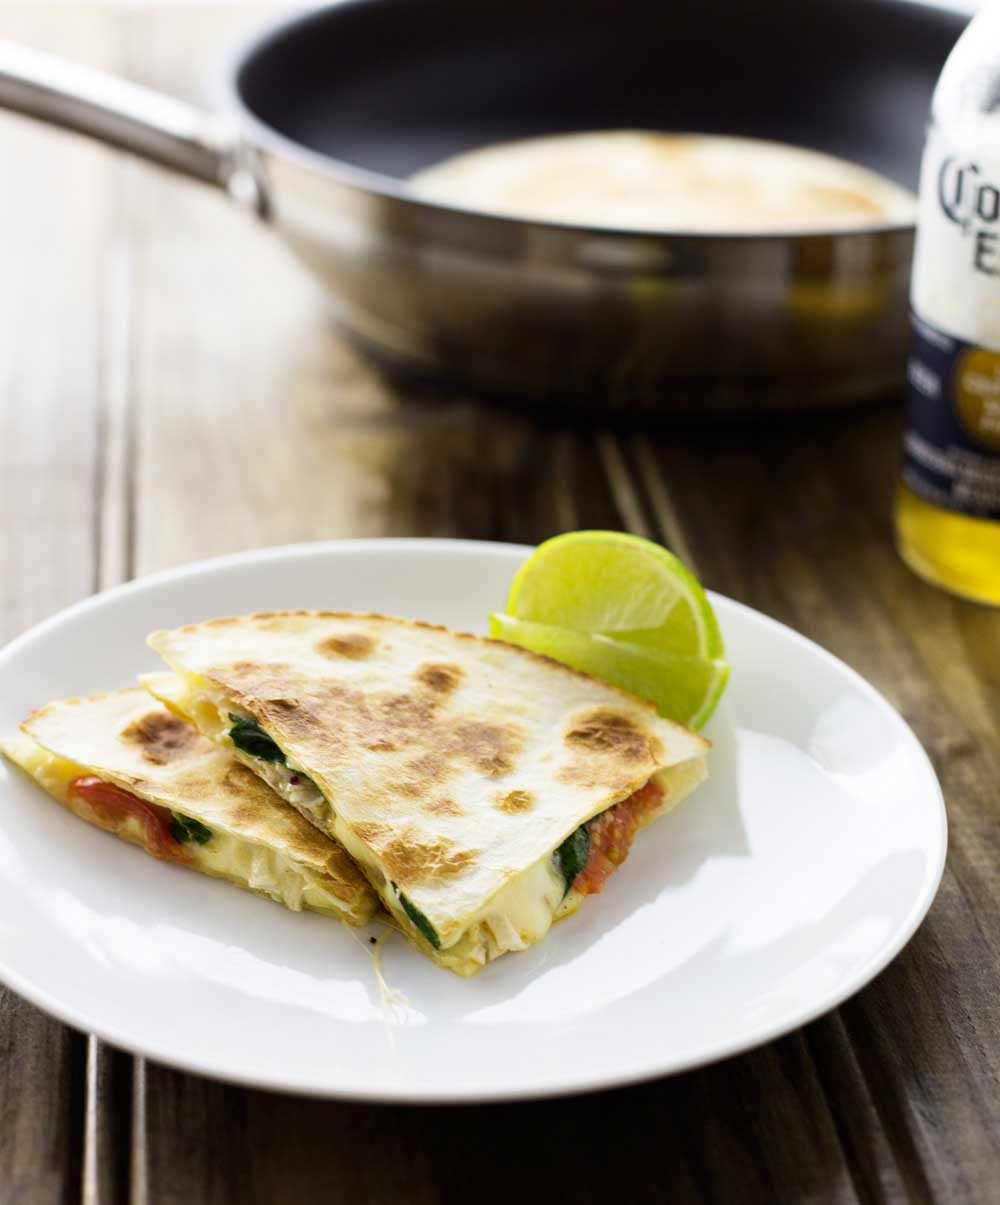 Cajun Chicken Quesadillas. Cheesy spicy chicken filled tortillas grilled until crisp and melted. A delicious snack or light meal.